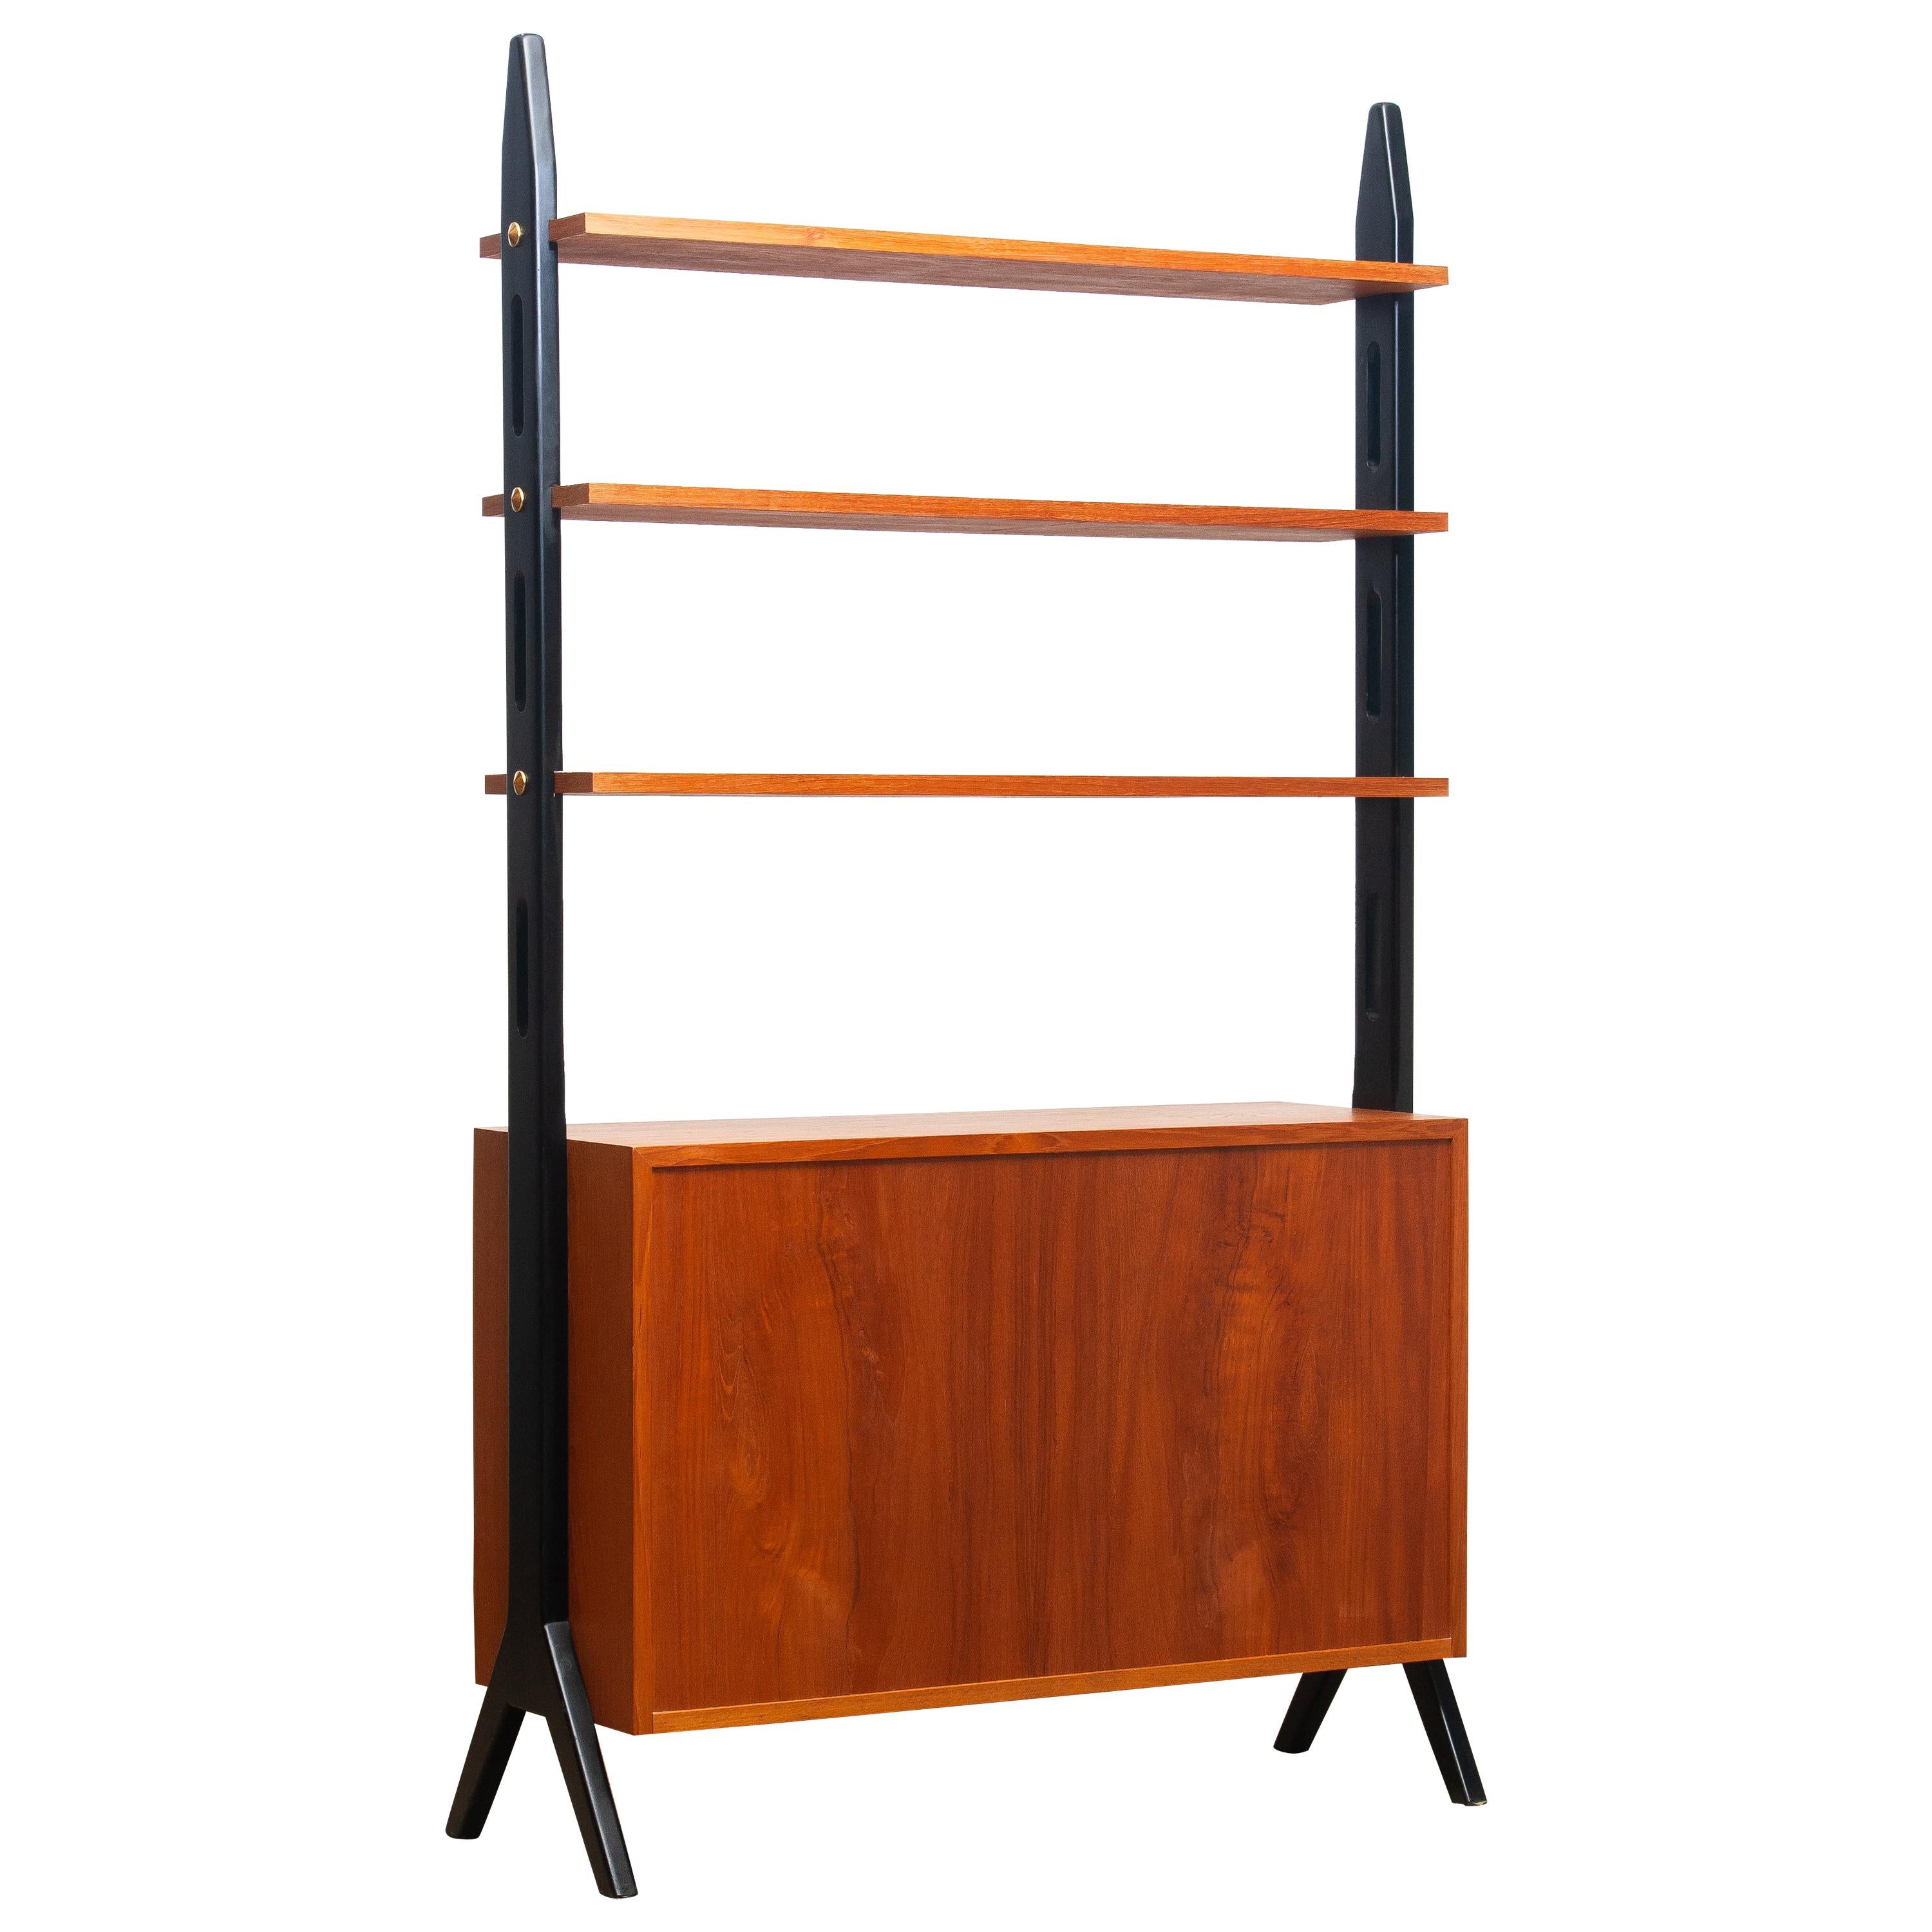 Beautiful Swedish bookcase / room divider / shelf’s made in teak from the 1950s.
Two folding doors, with a lock, inside the cabinet is a shelf that can be adjusted in two positions.
The three top shelf’s are placed in a fixed position.
Overall